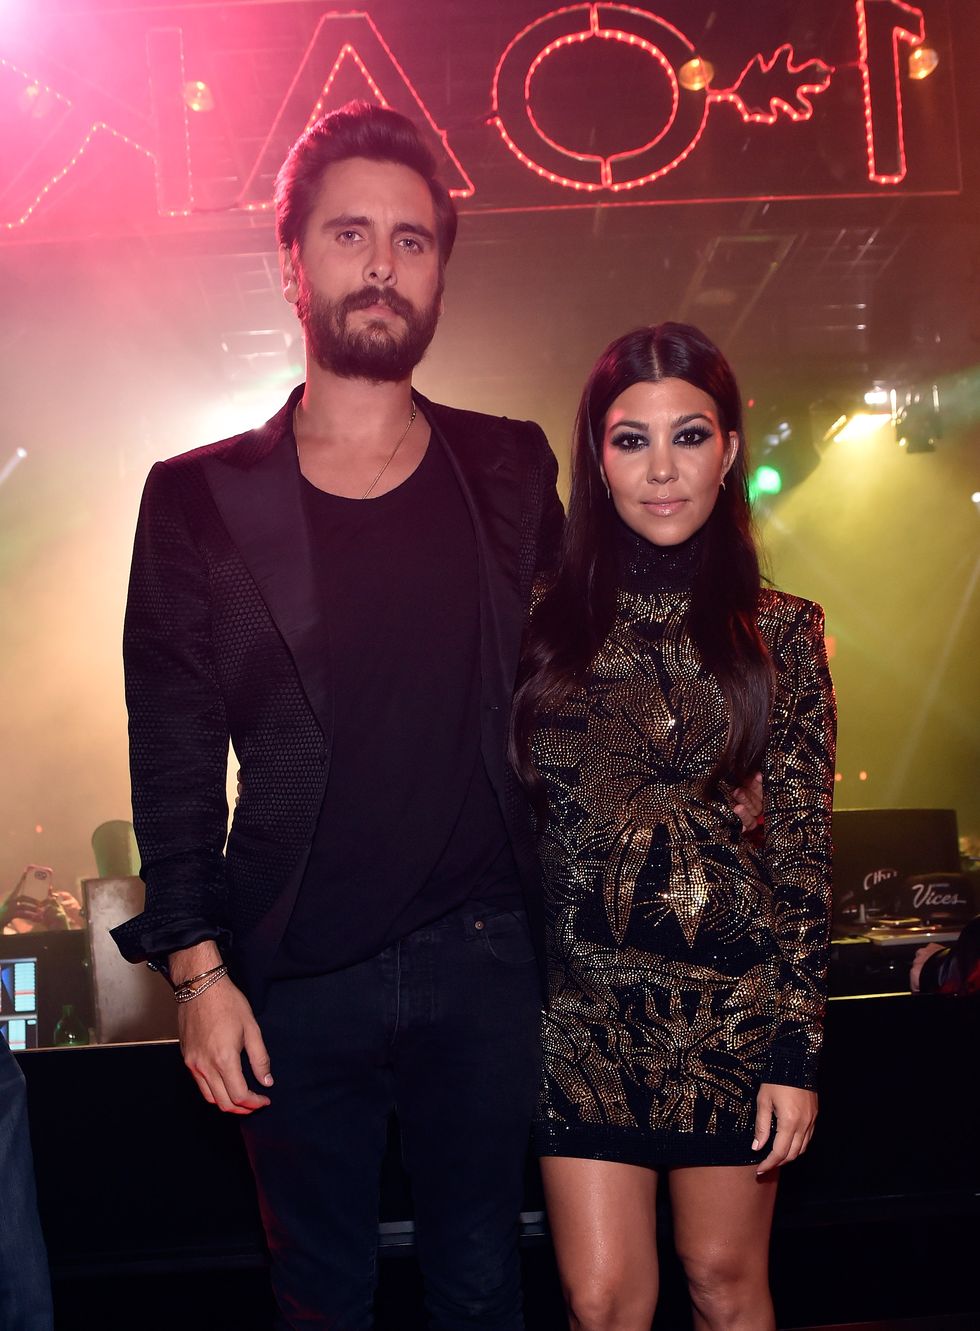 las vegas, nv may 23 exclusive coverage television personalities scott disick l and kourtney kardashian attend his birthday celebration at 1 oak nightclub at the mirage hotel  casino on may 23, 2015 in las vegas, nevada photo by david beckerwireimage